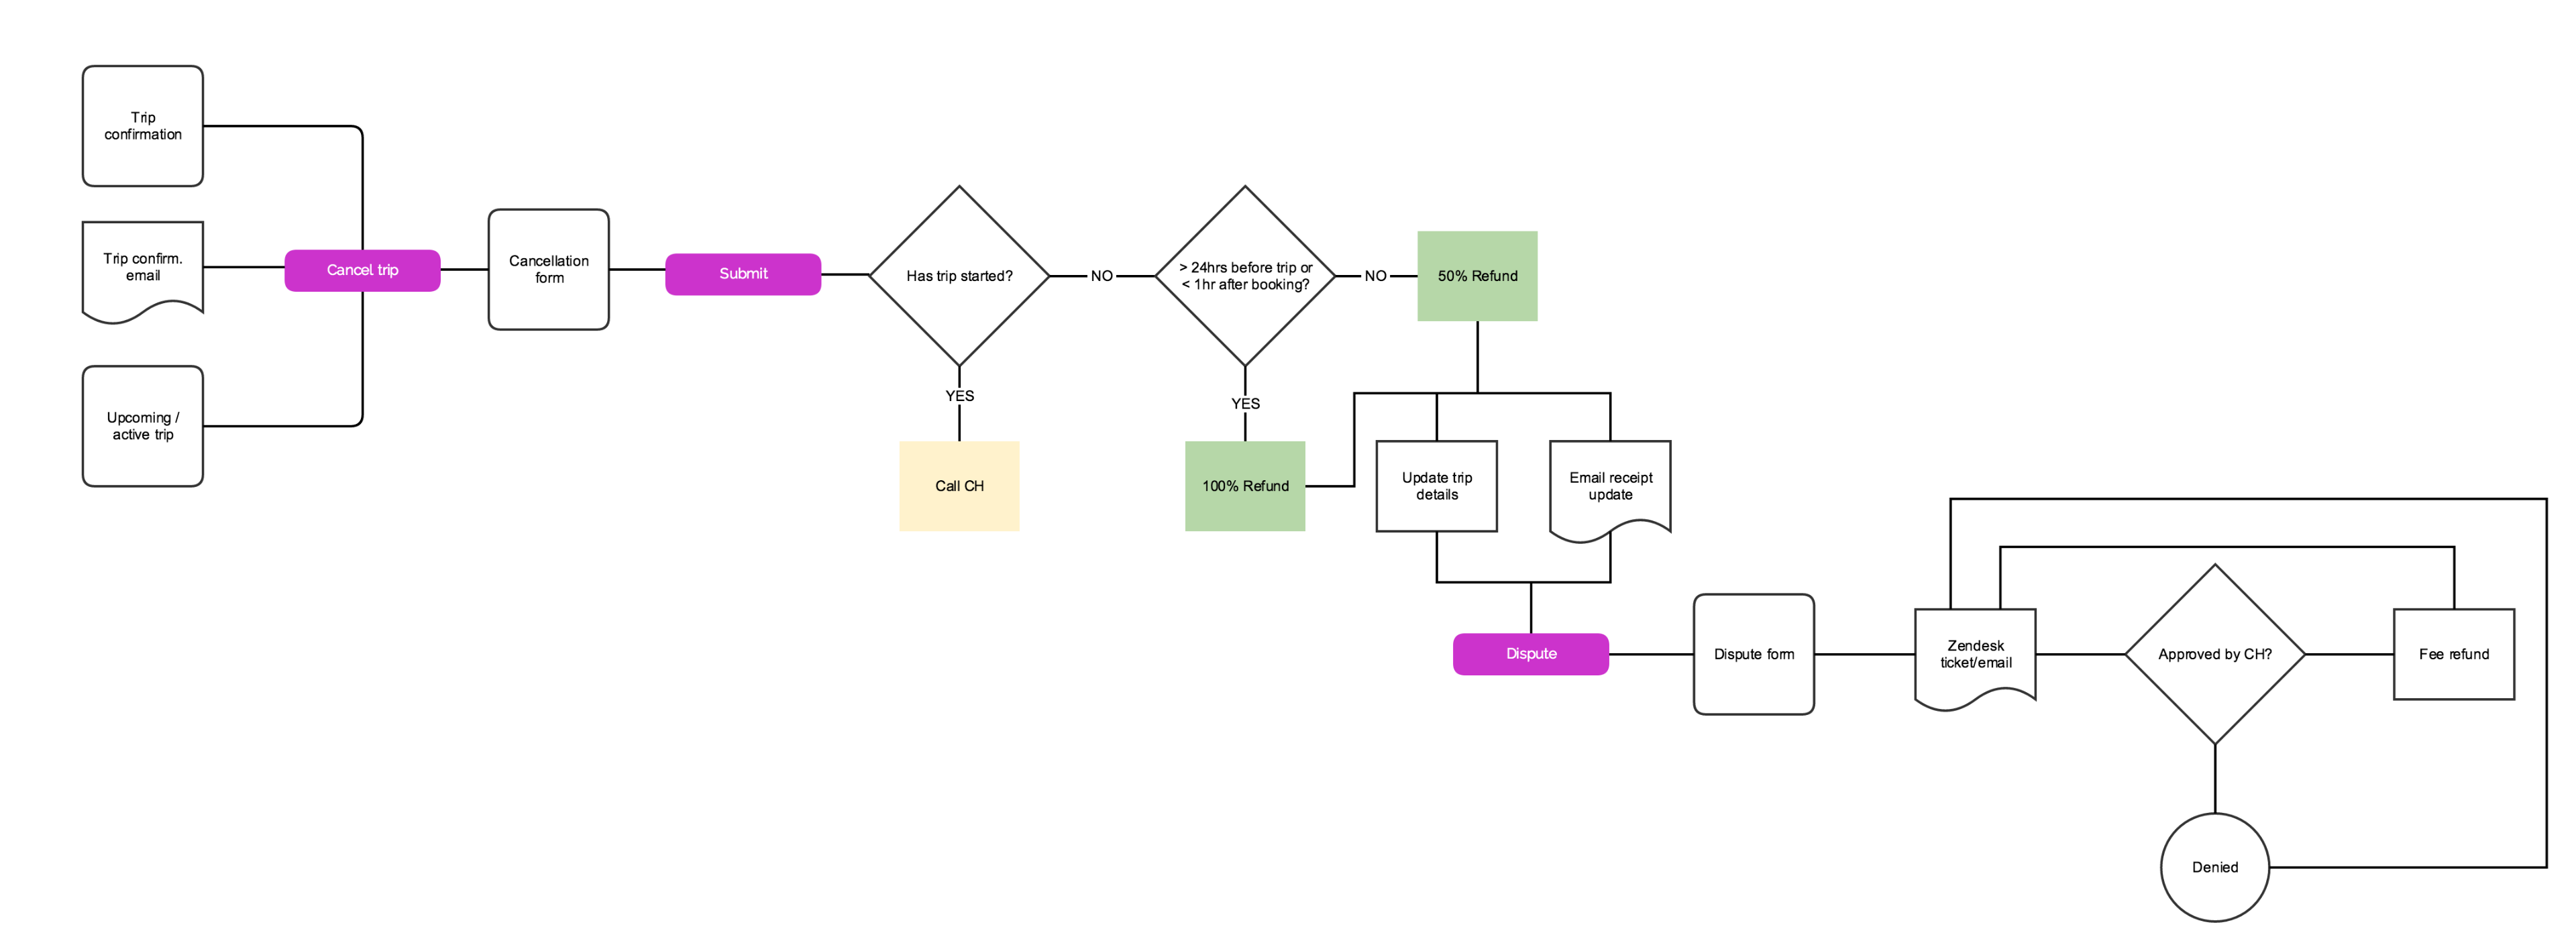 Userflow mapping out various scenarios related to the Getaround cancellation policy